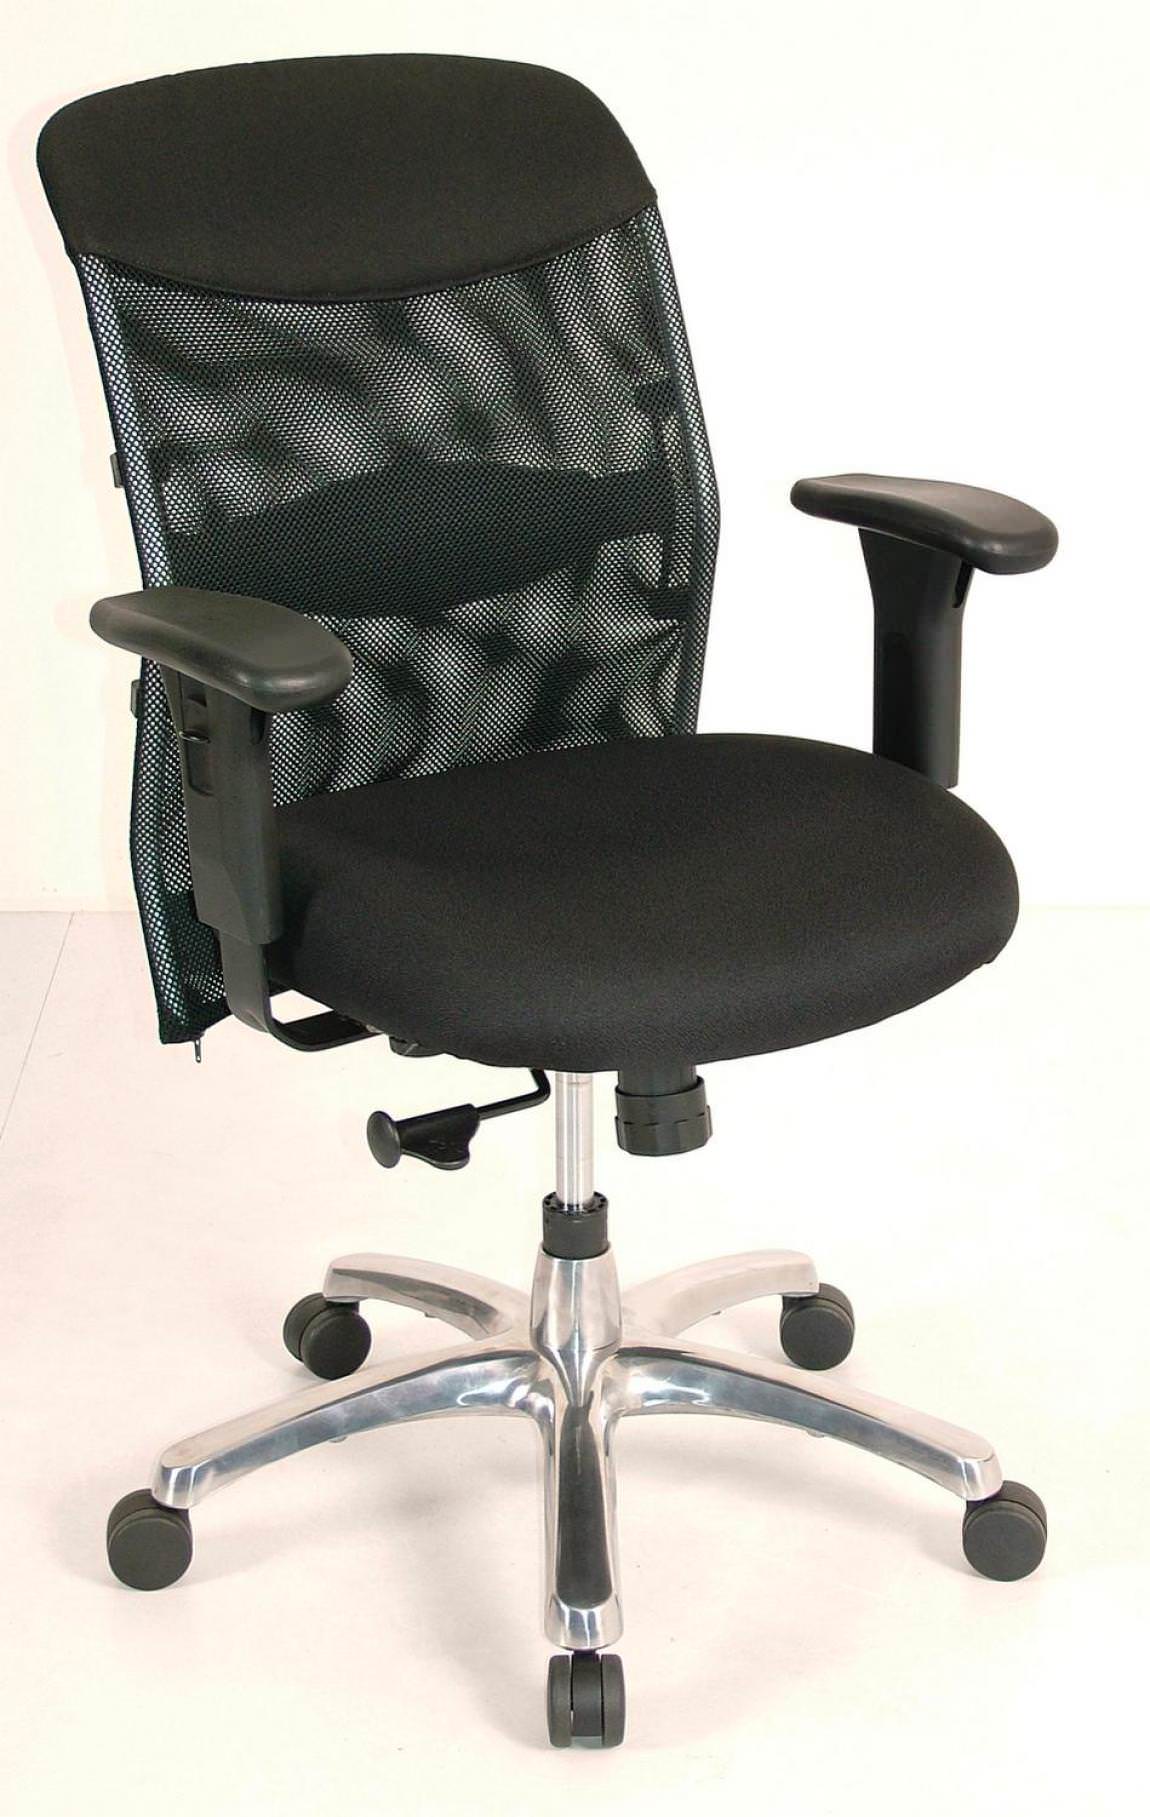 Mani-Chord Mesh Conference Mid-Back Chair with Arms